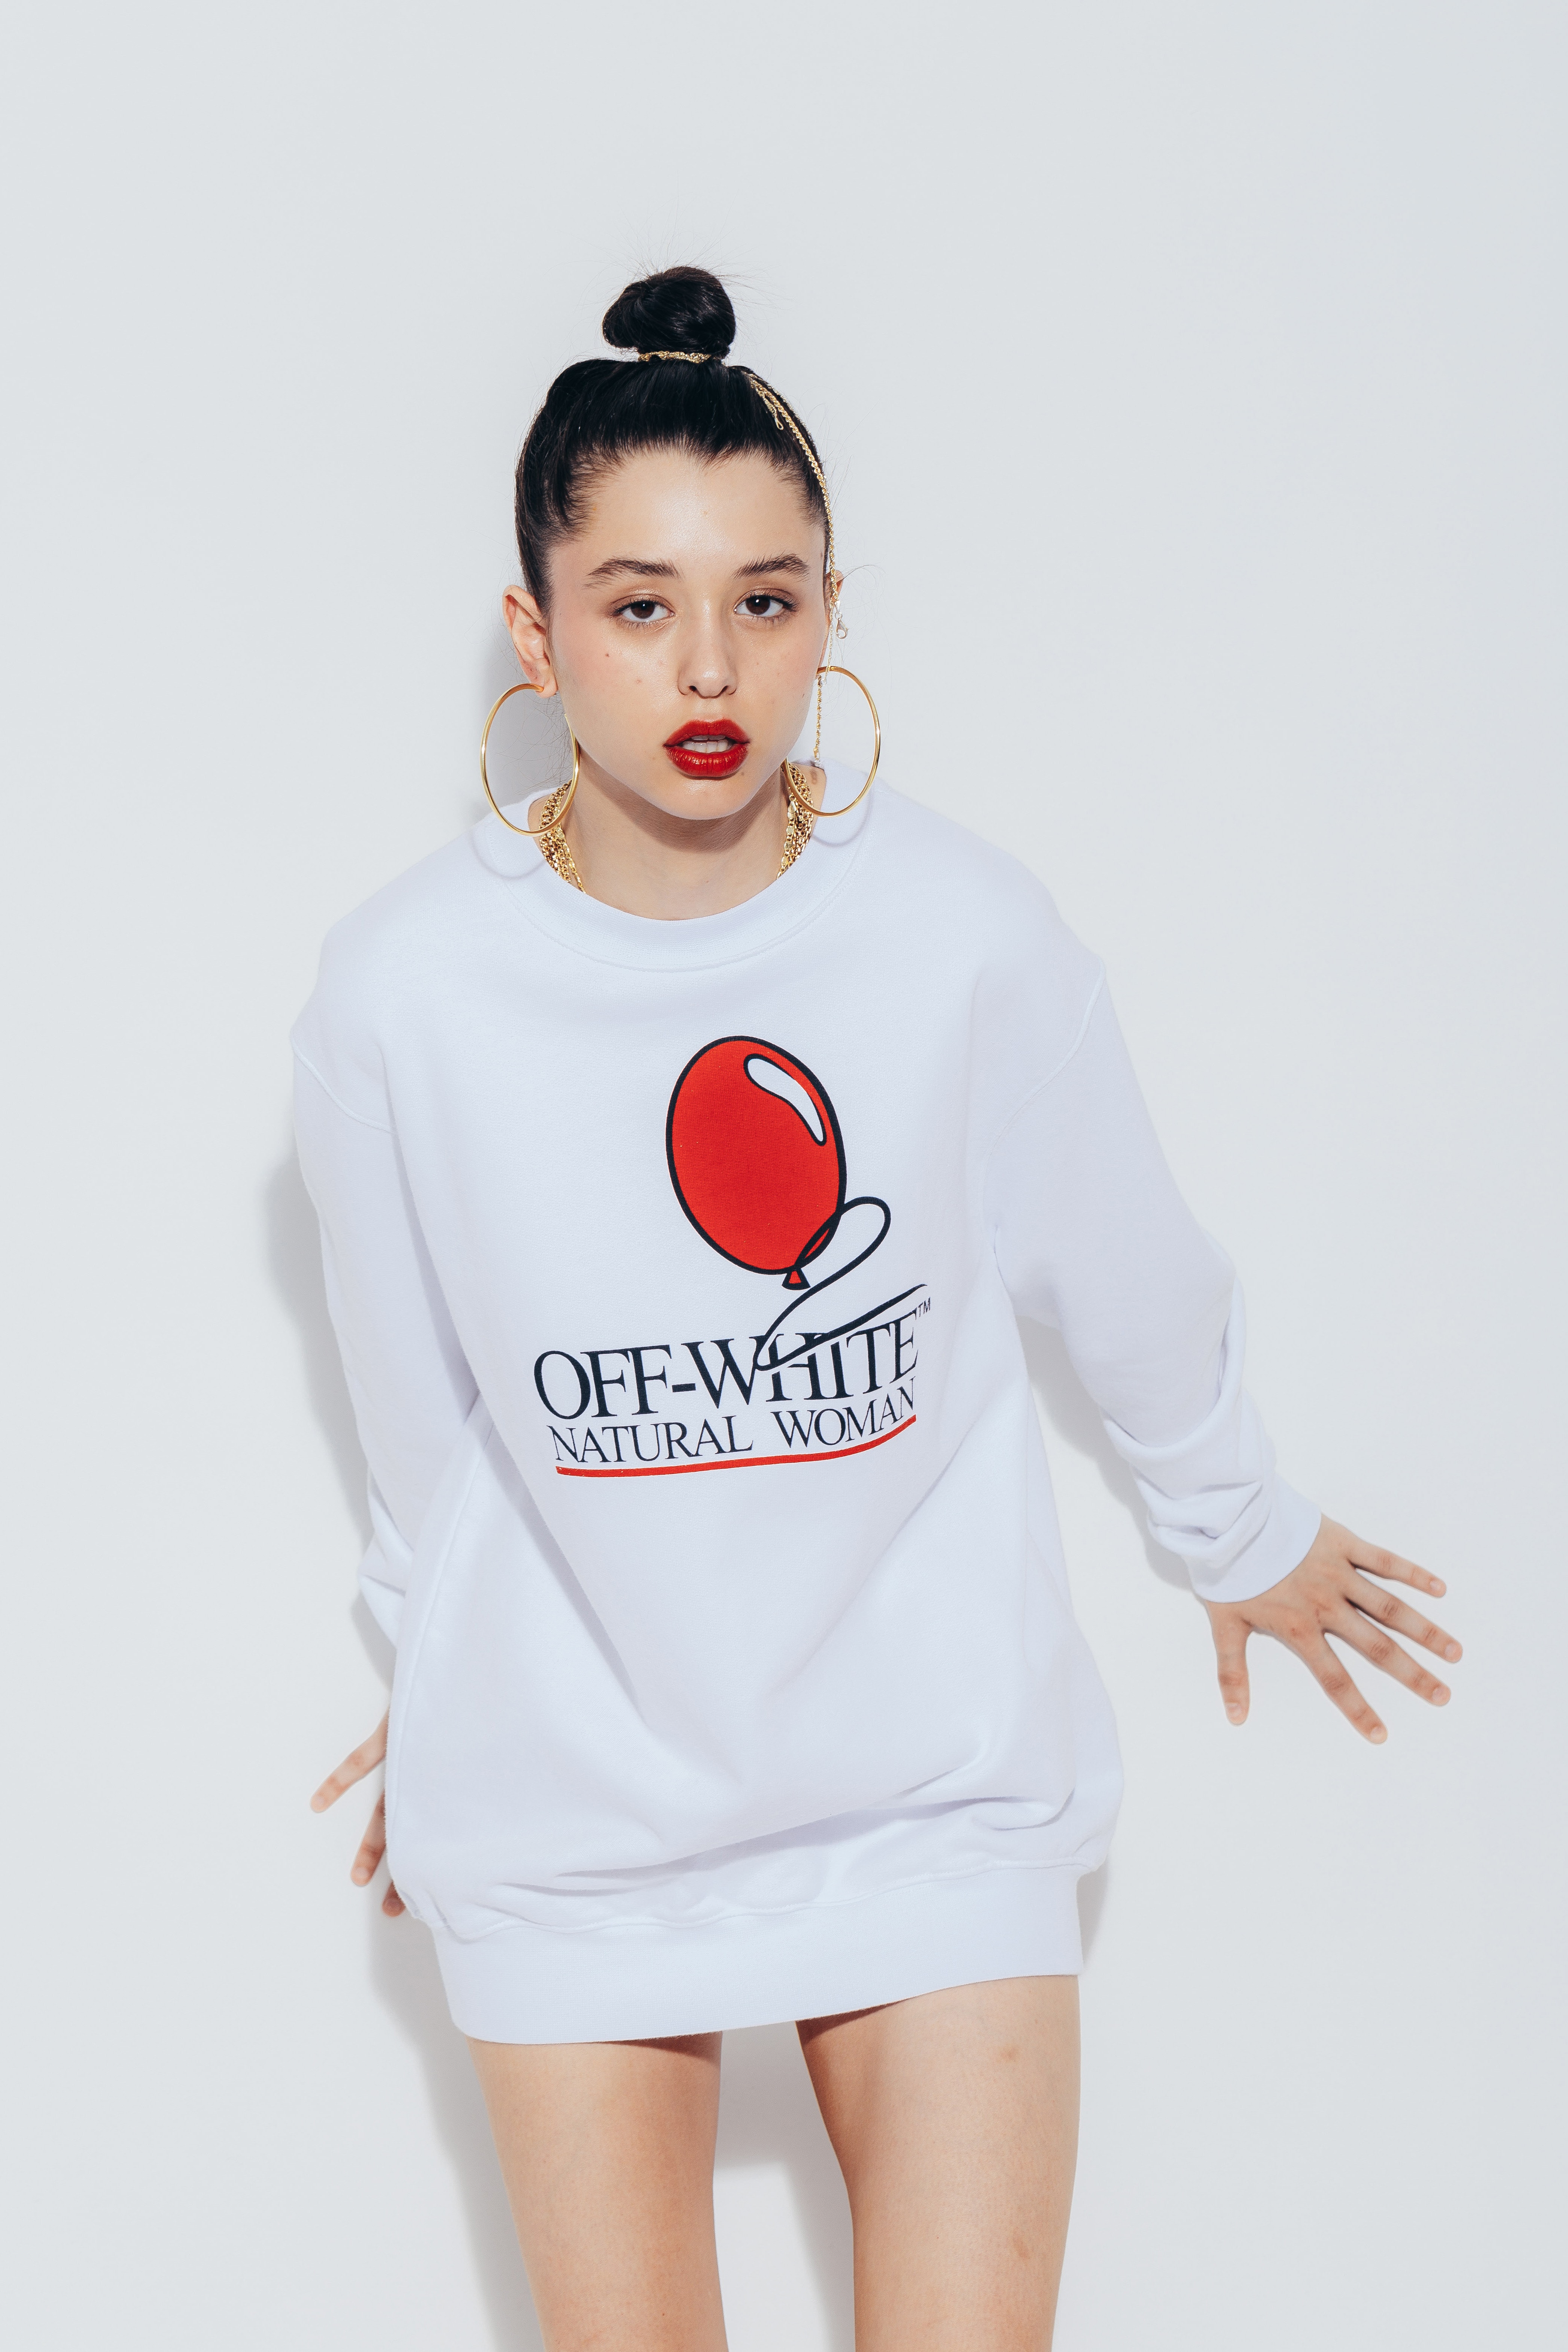 Spring Streetwear Editorial by Leisure Center KOKKO Kappa Loewe Off-White Faith Connexion Palm Angels